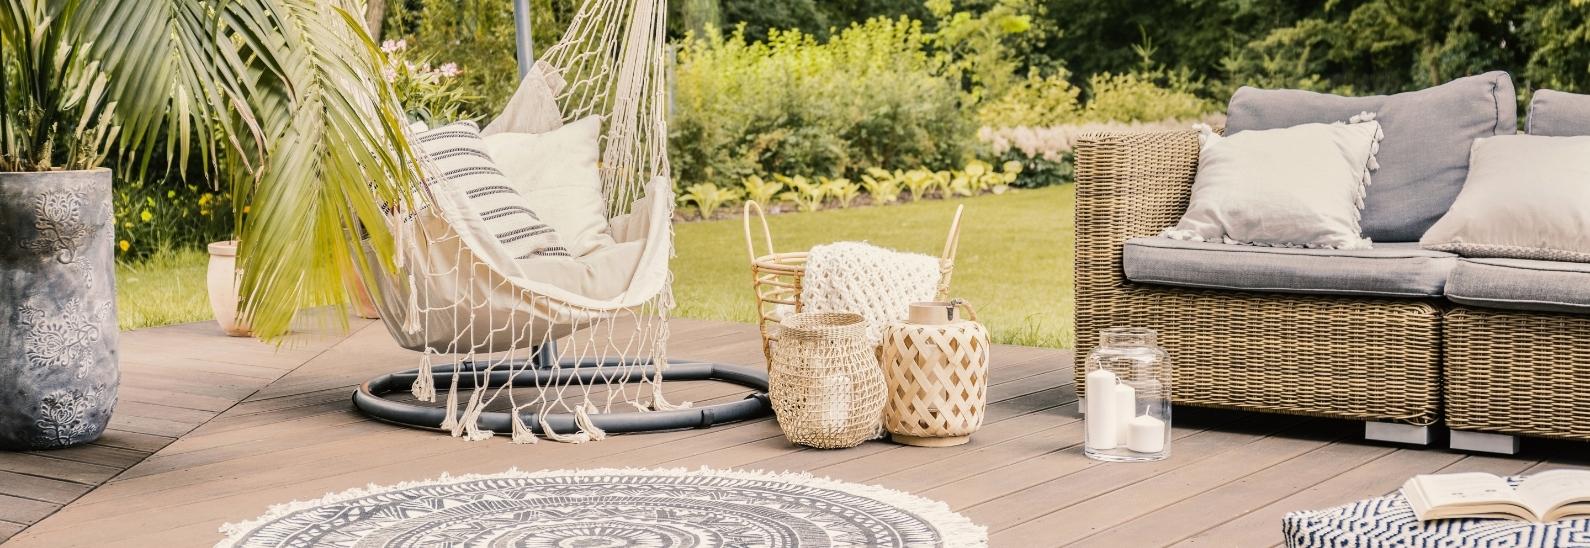 Patio Relaxation 101: Backyard Hammock Ideas and More